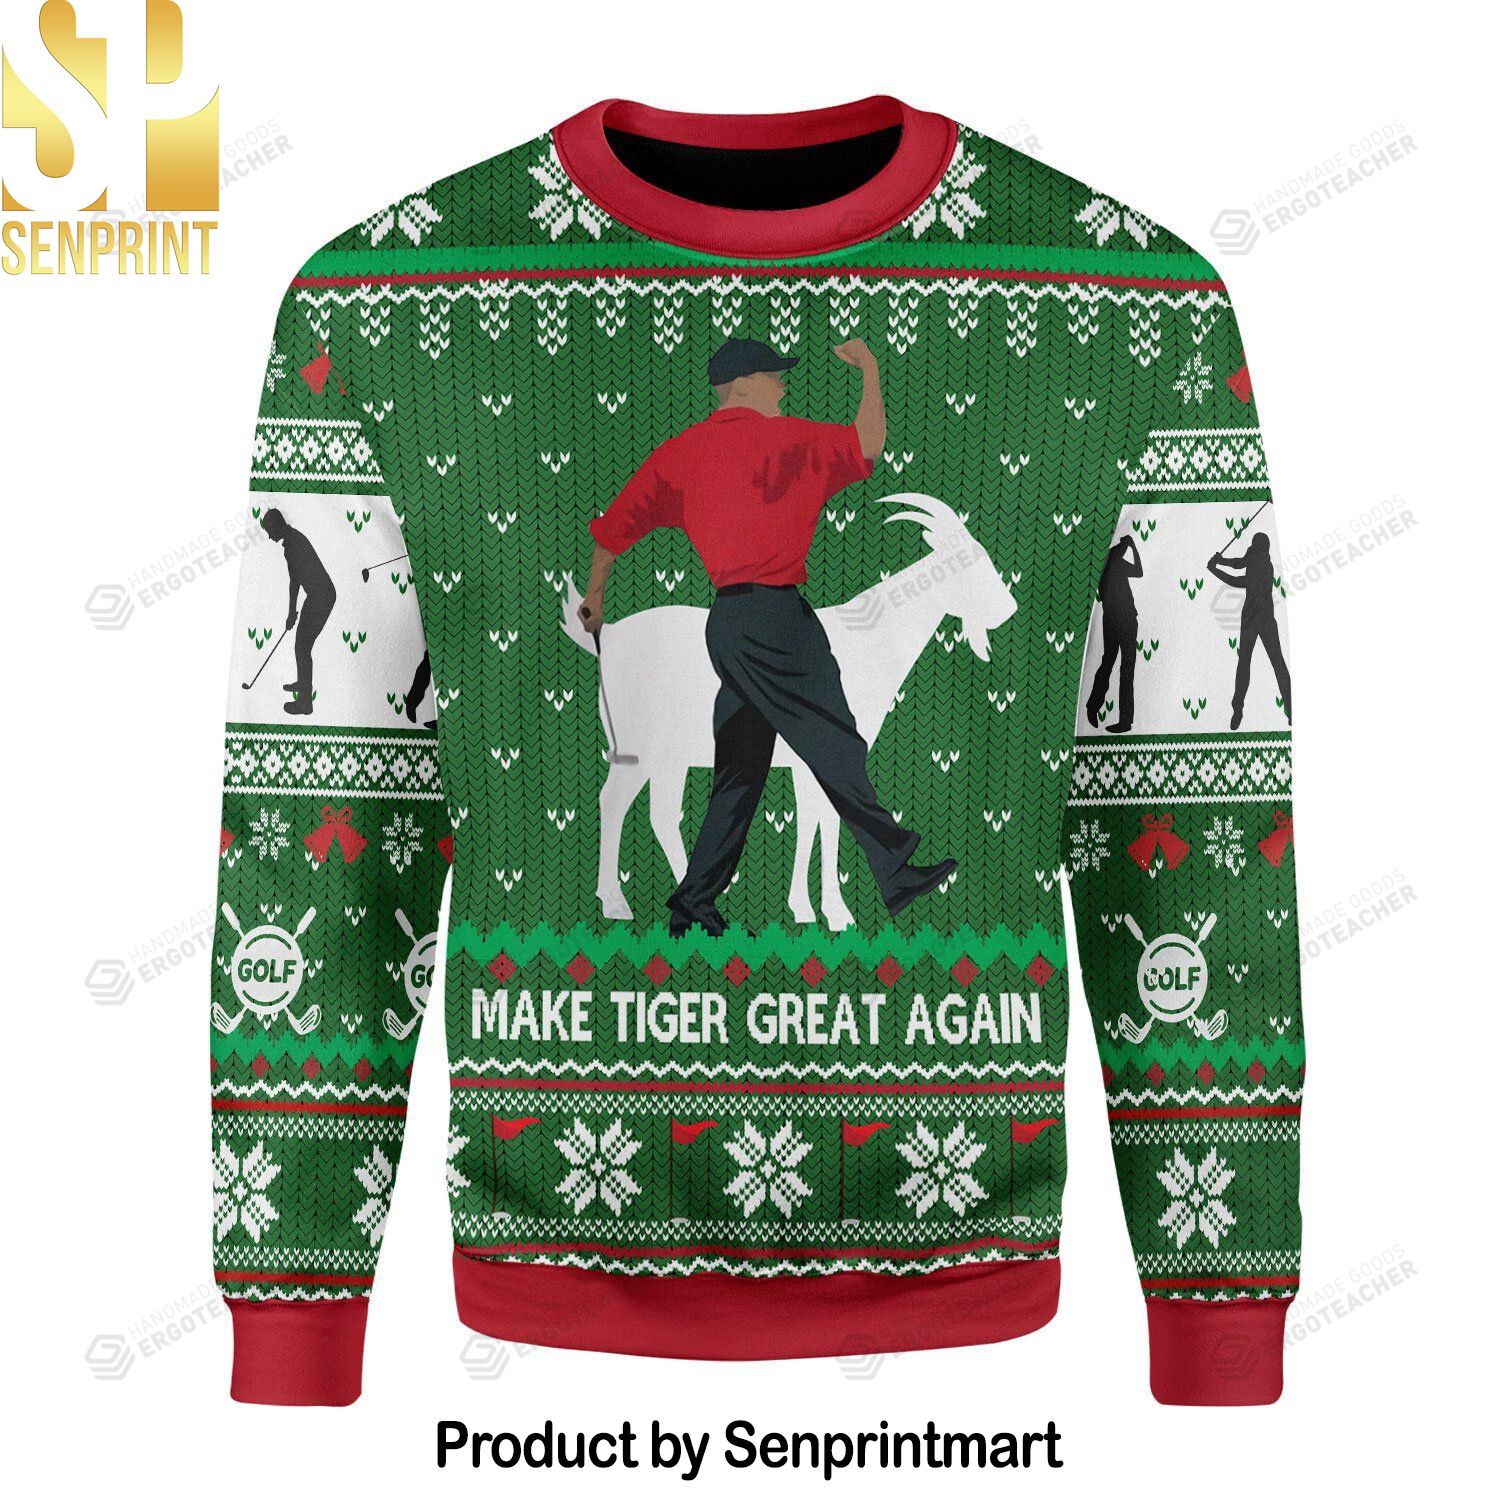 Make Tiger Great Again Ugly Xmas Wool Knitted Sweater